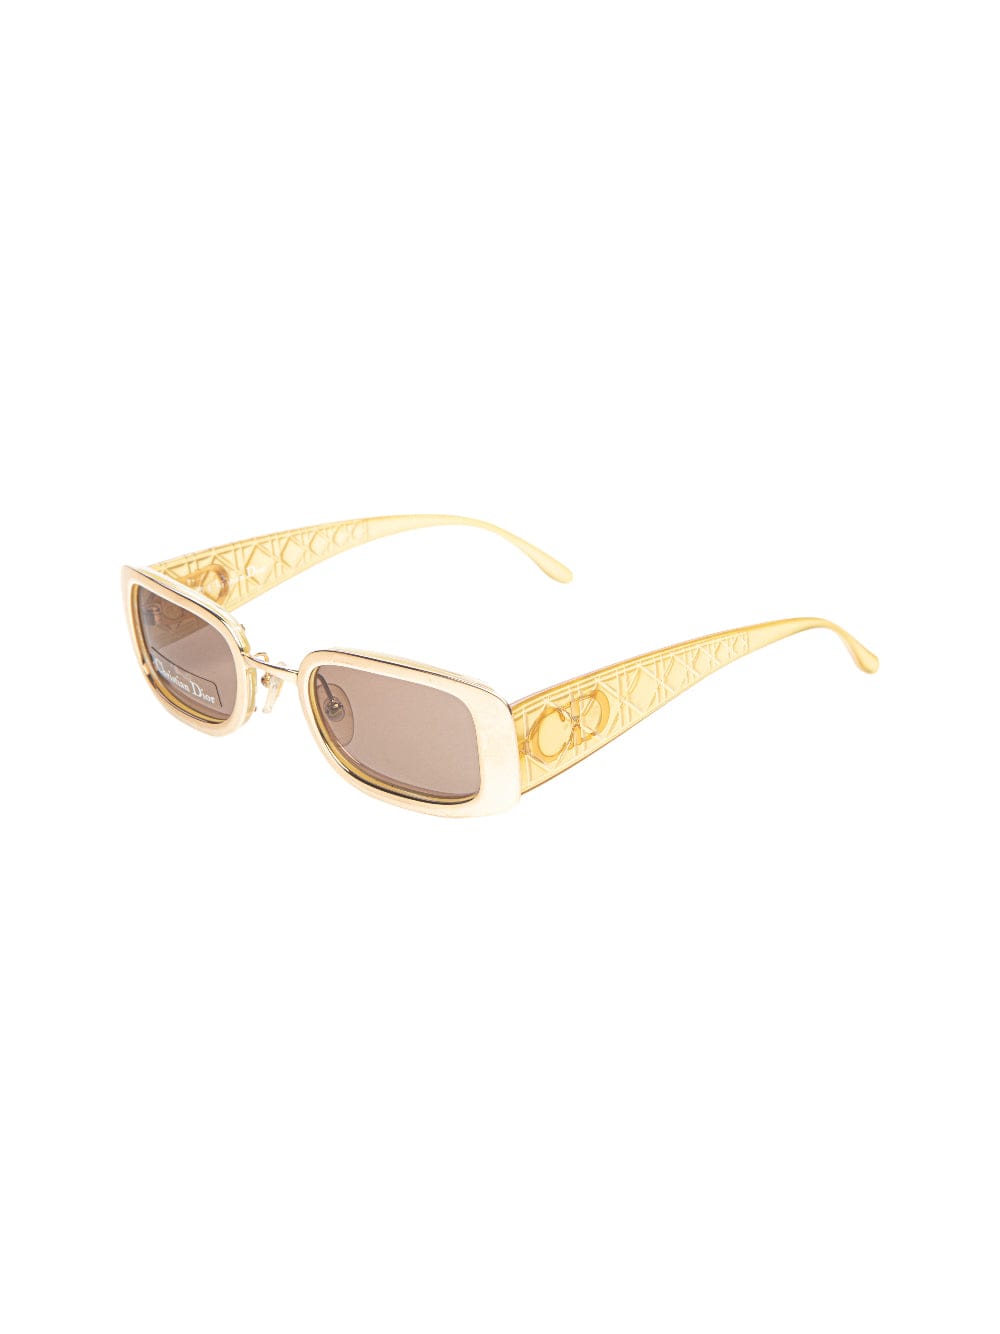 Ice - Limited Edition - Gold Sunglasses